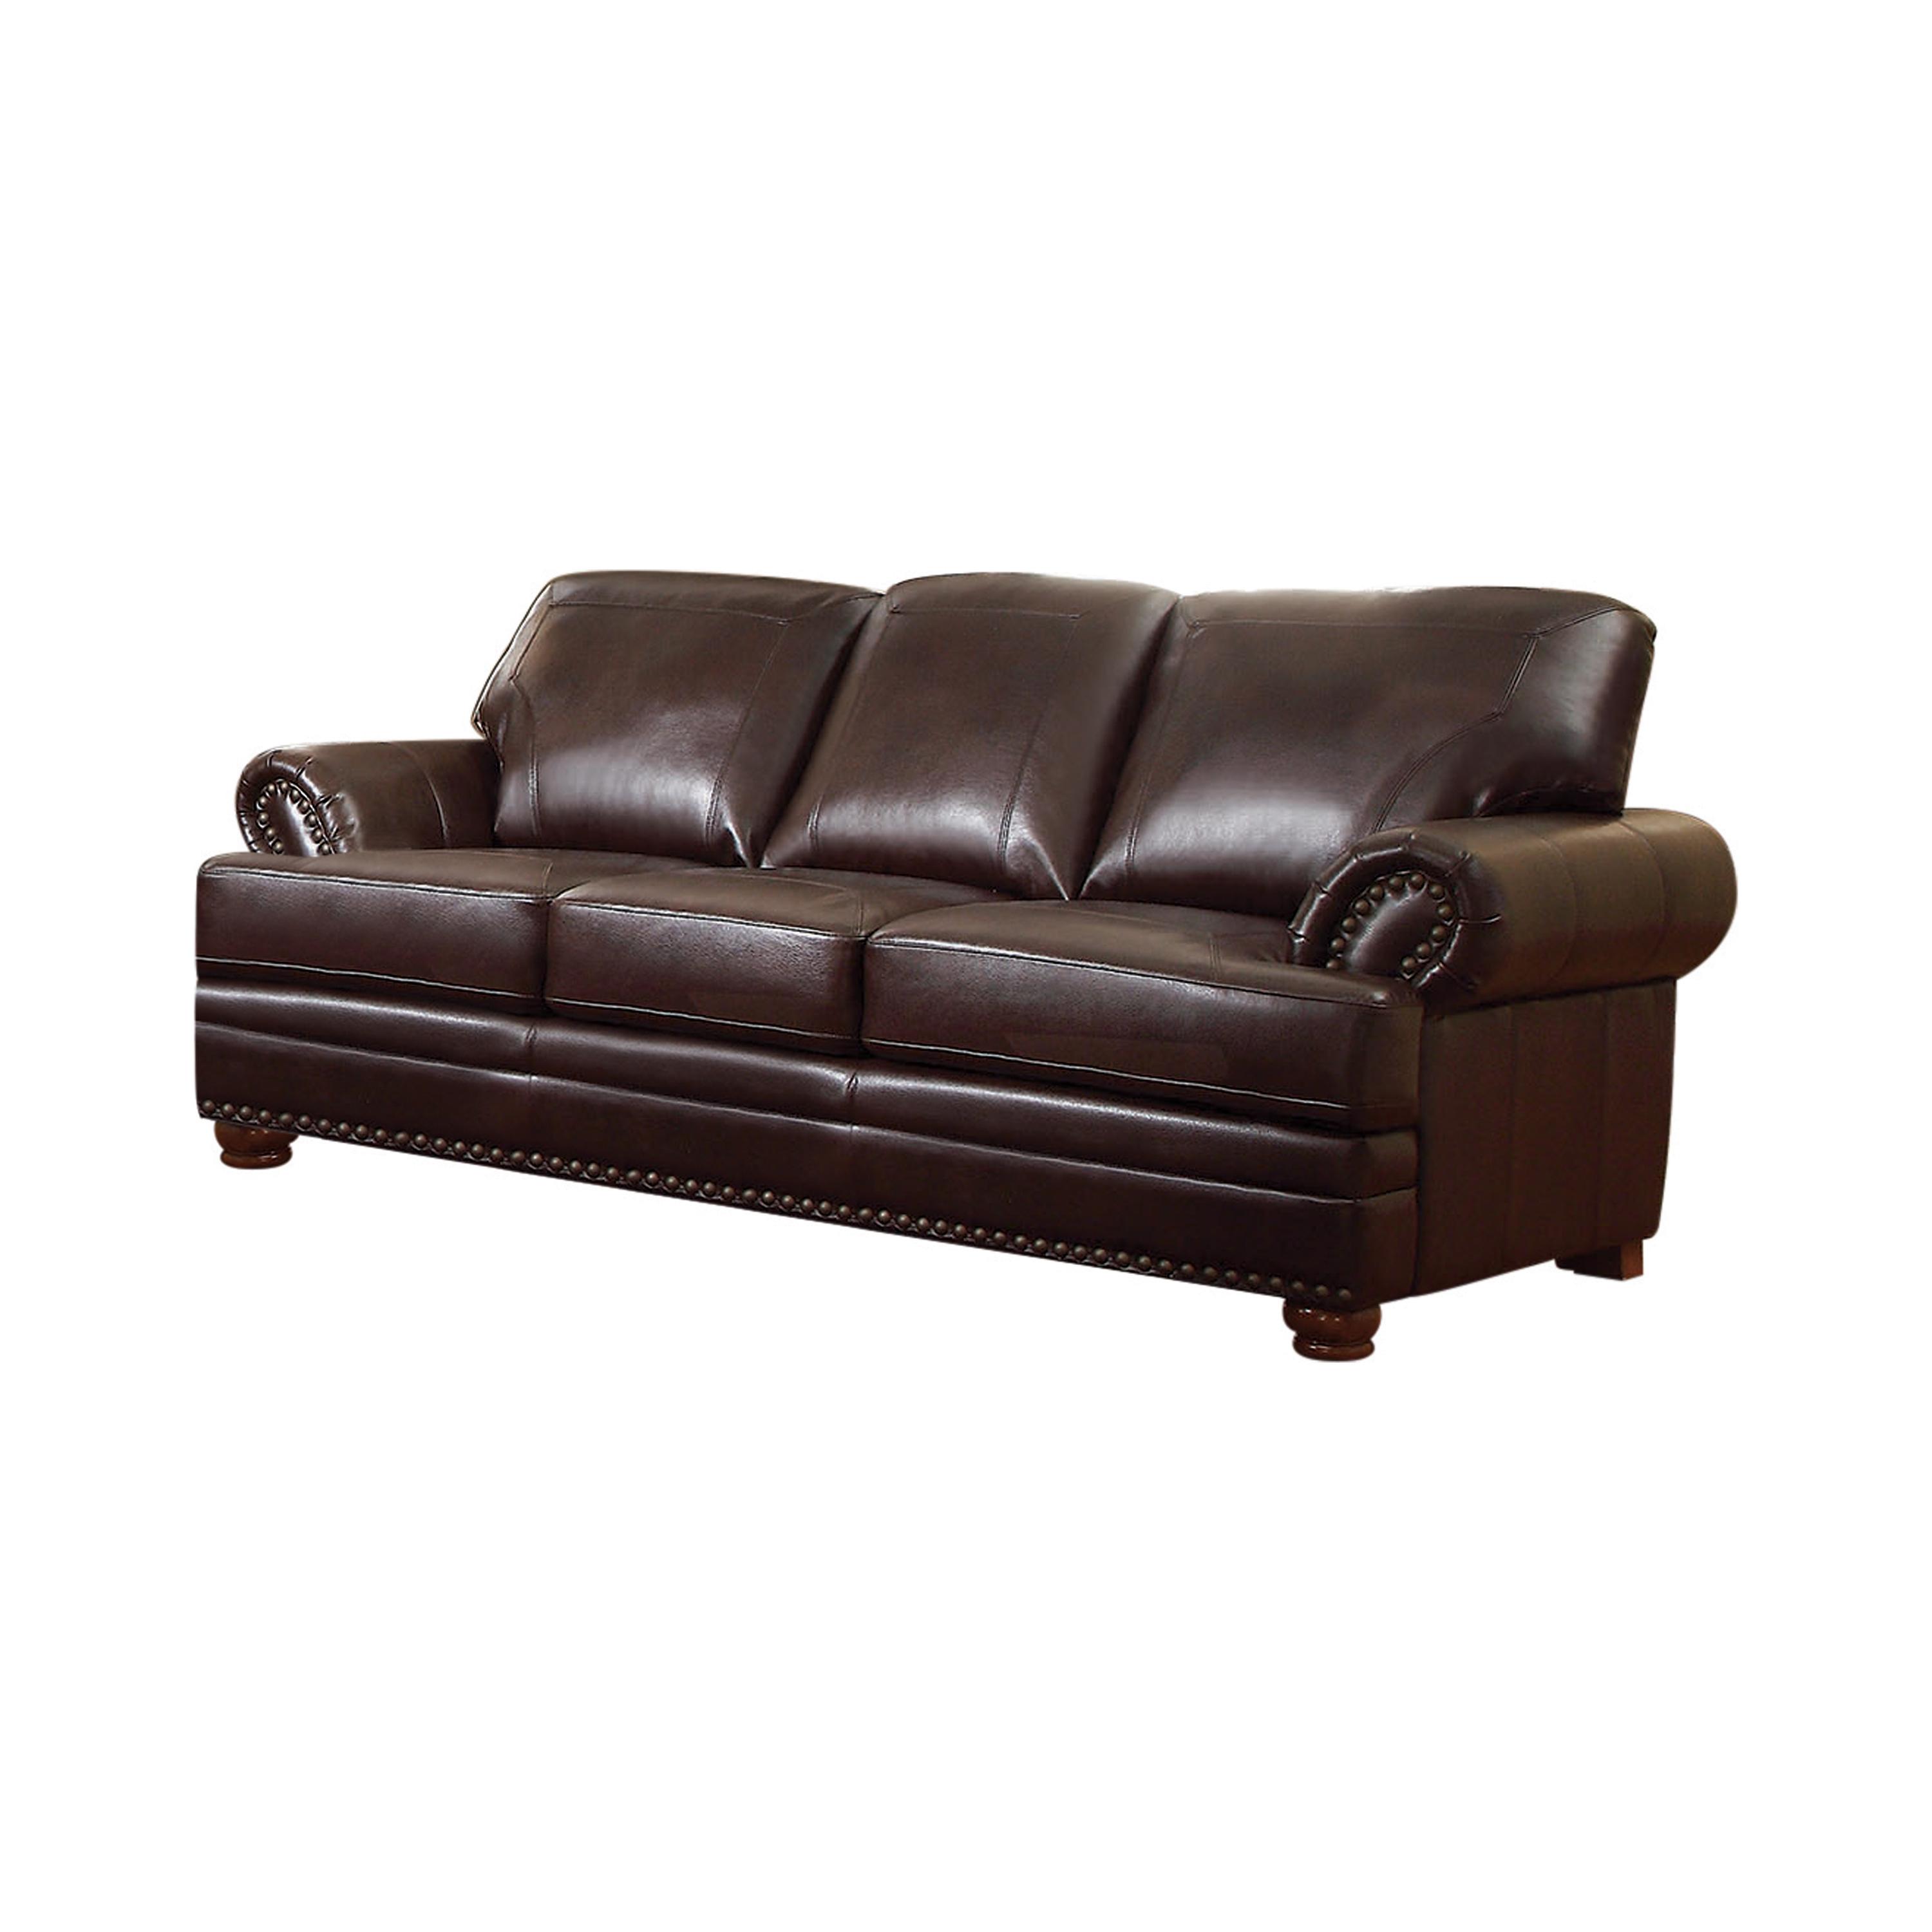 Traditional Sofa 504411 Colton 504411 in Brown Leatherette